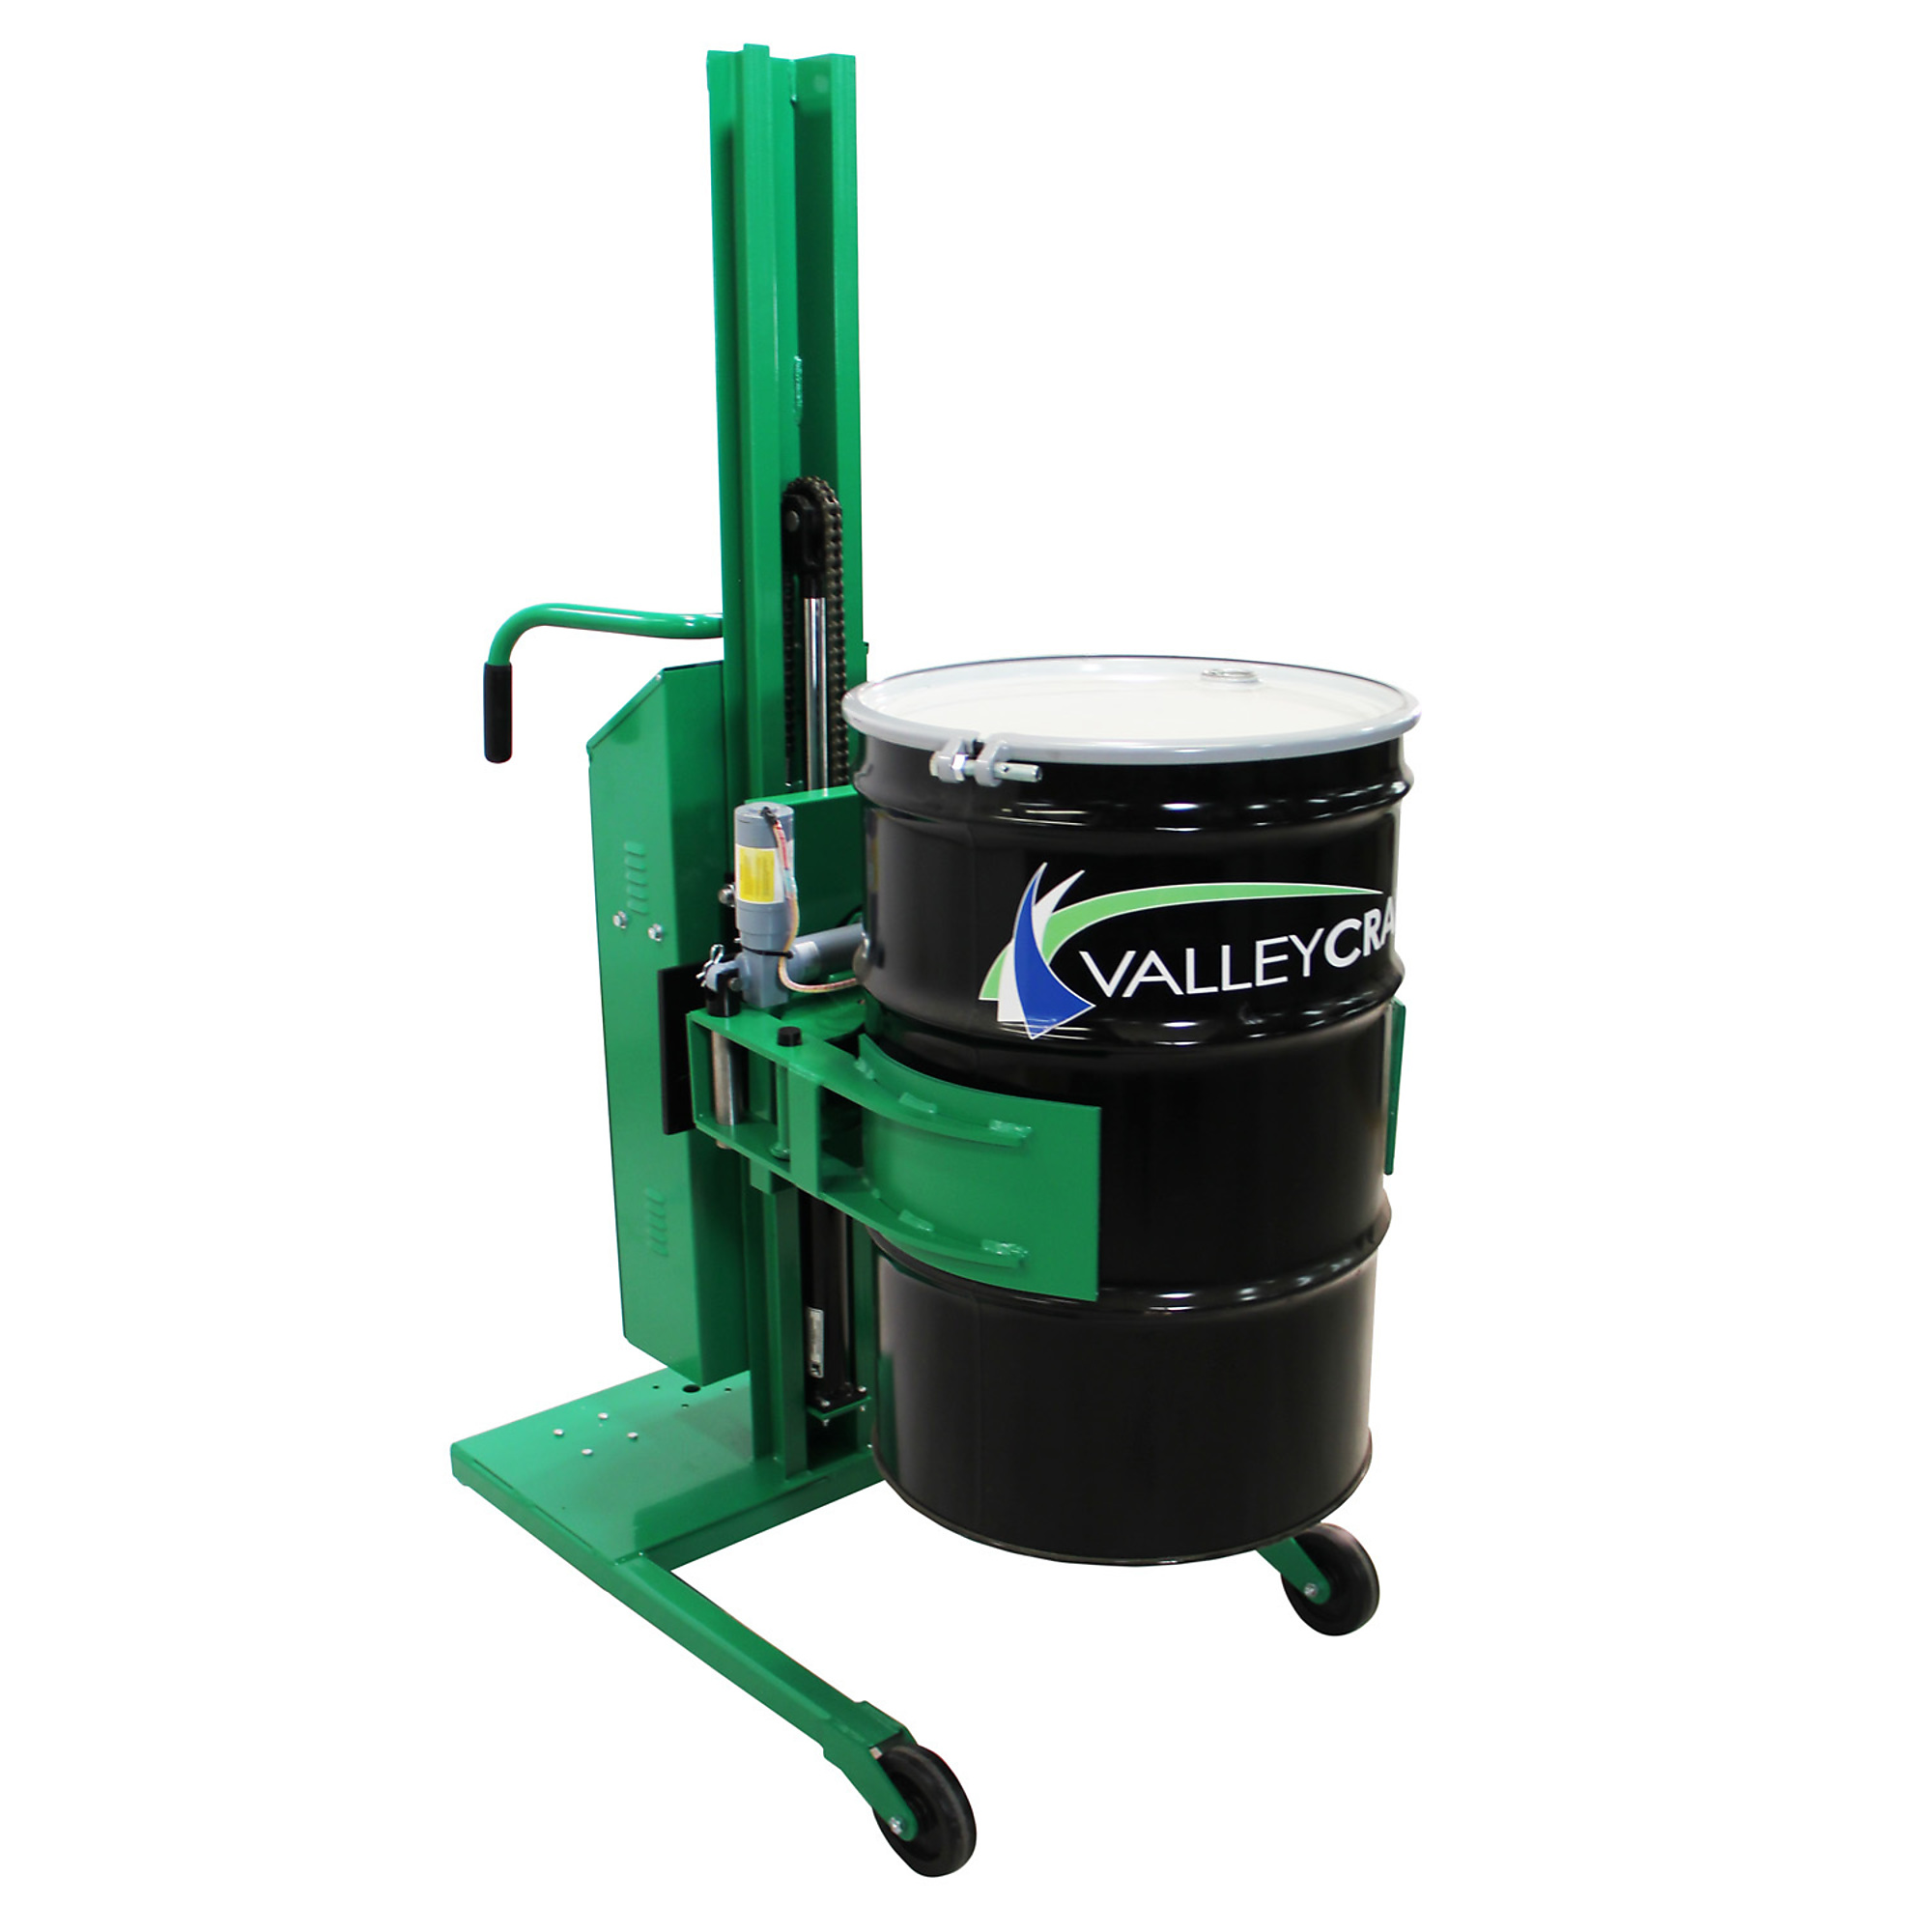 Valley Craft, Drum Lift Rotator, Semi-Powered, Battery Included, Capacity 800 lb, Model F88585C3